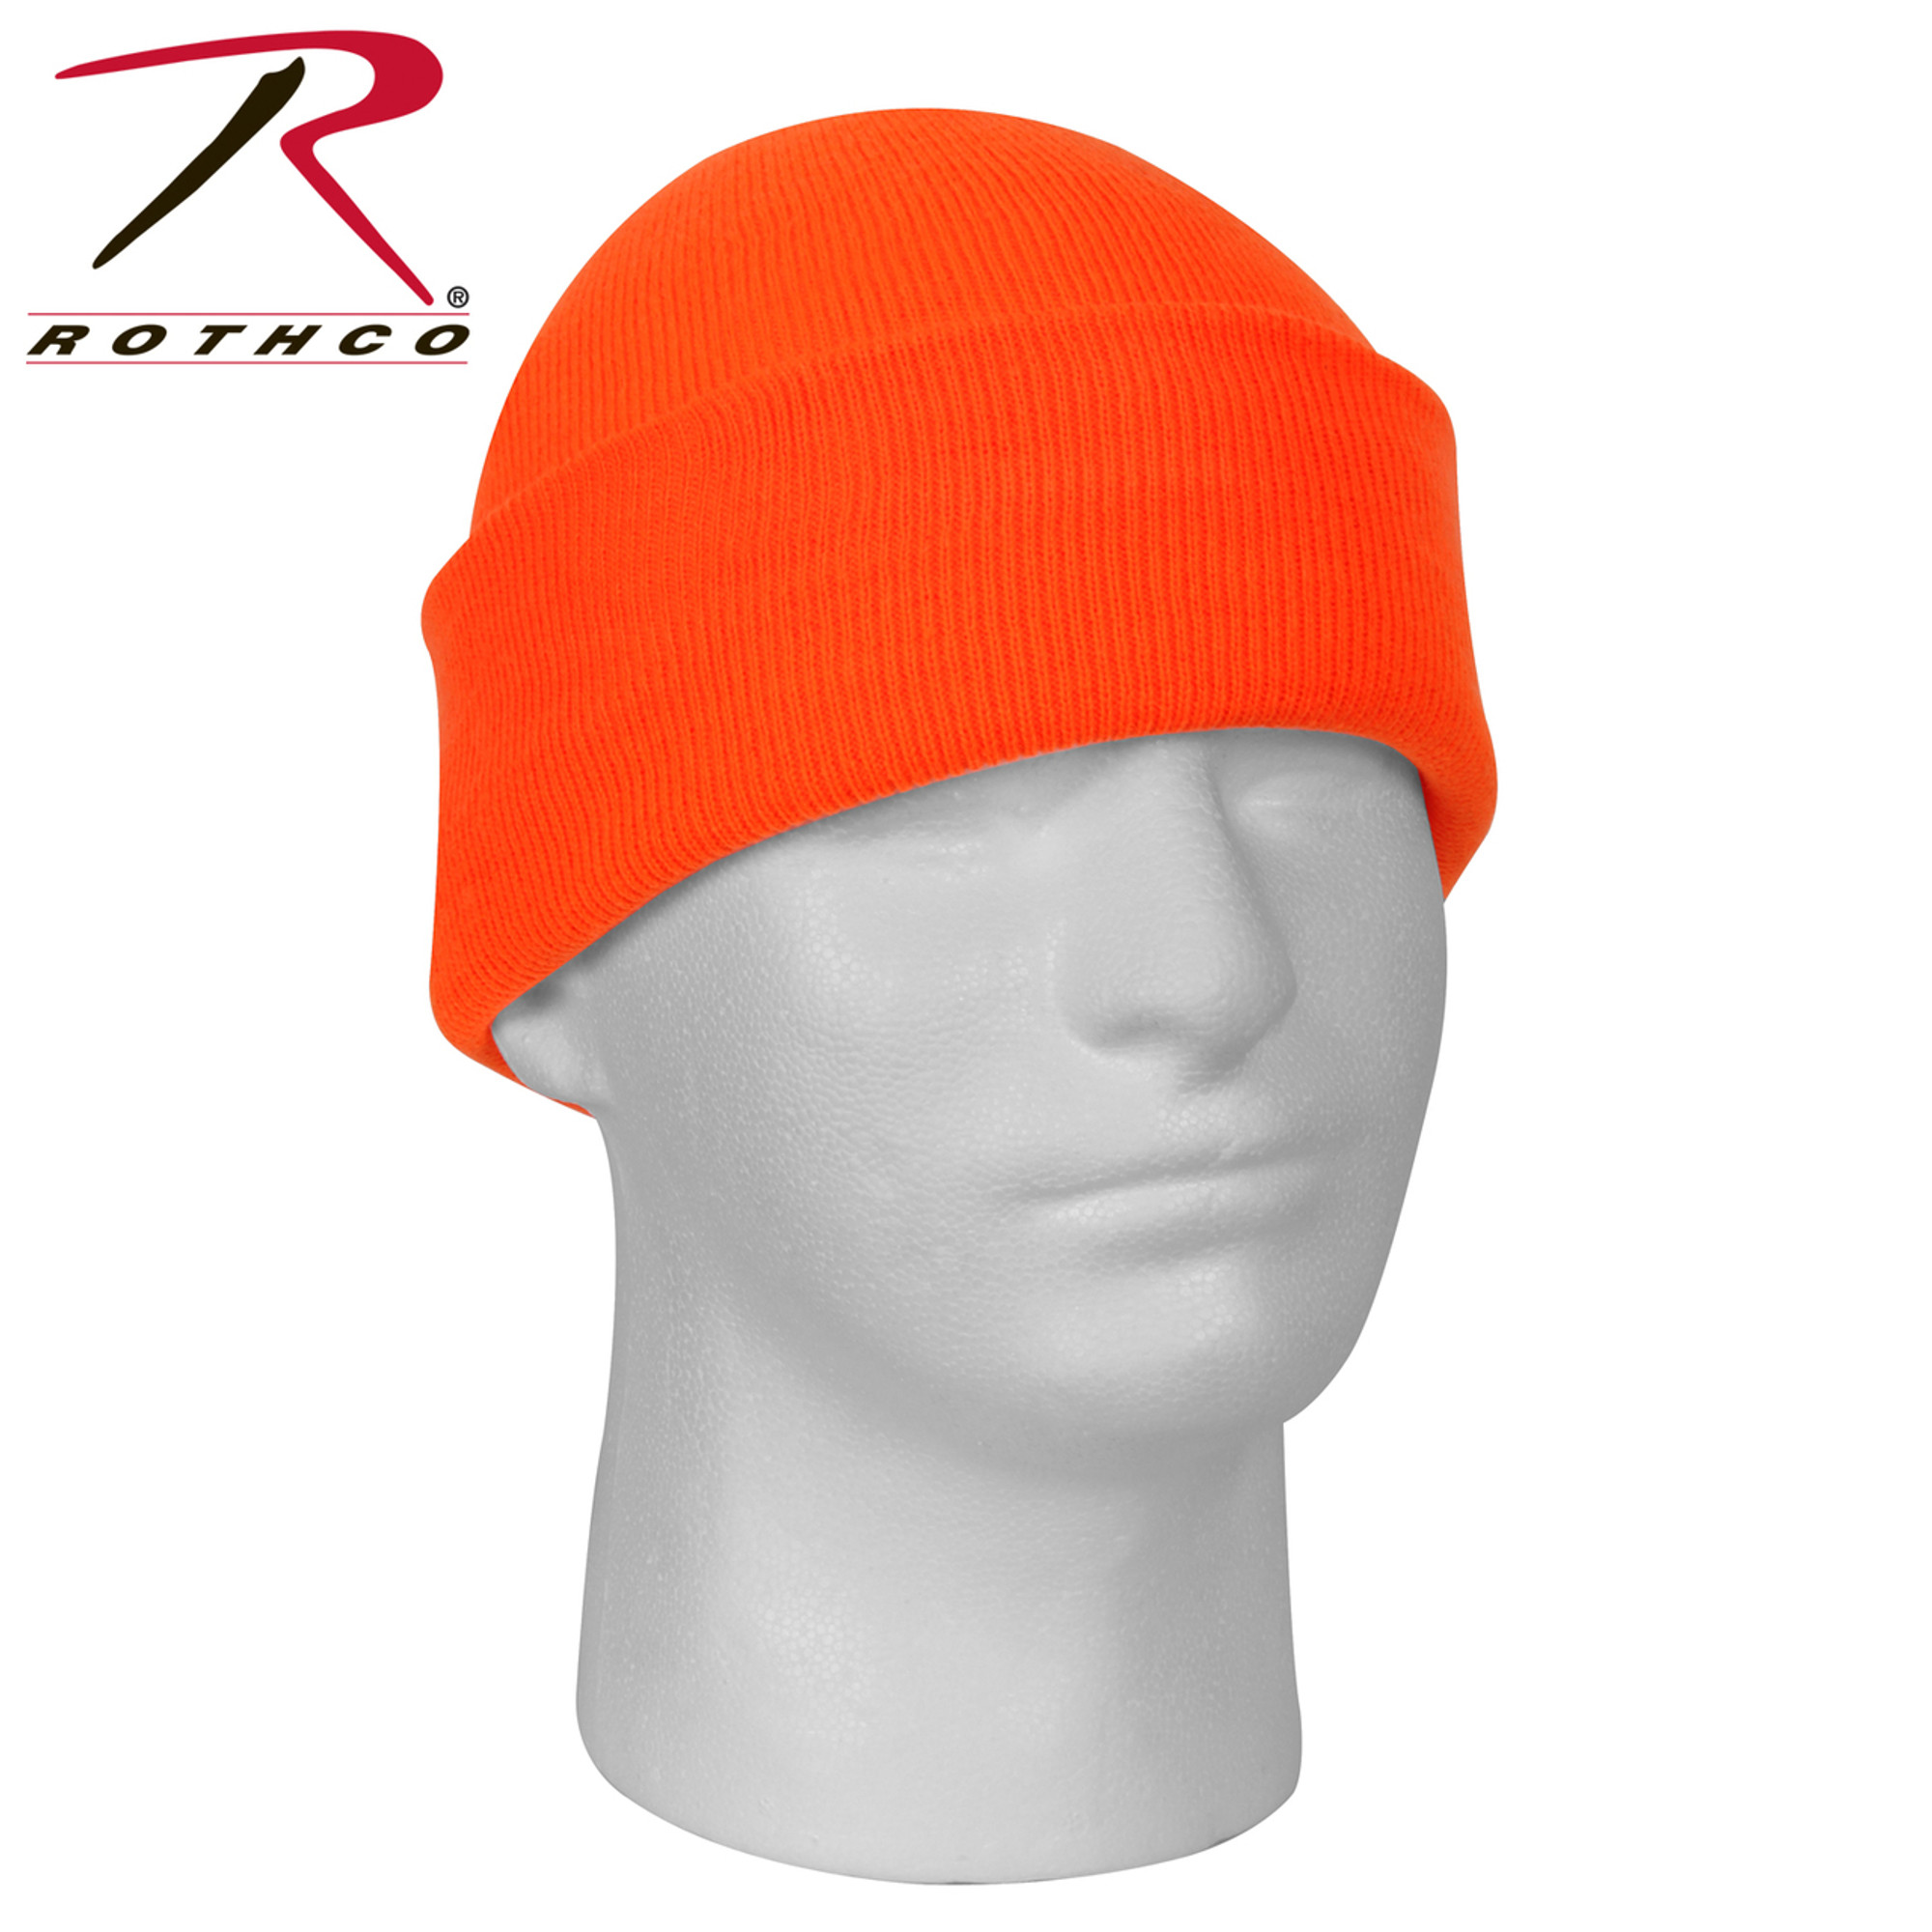 Rothco Deluxe Fine Knit Watch Cap - Safety Orange